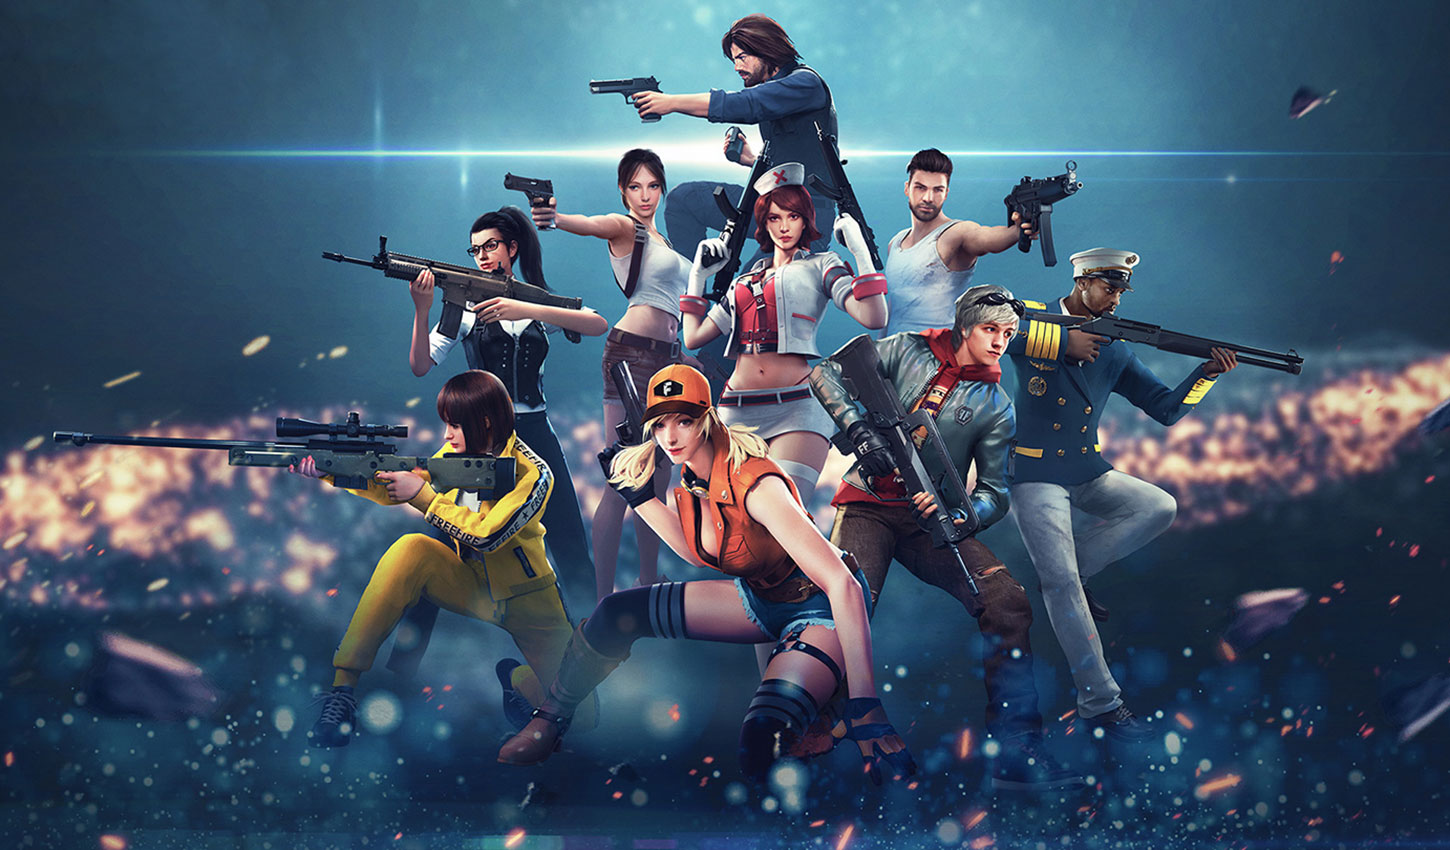 Garena Free Fire Posts Record Quarter with $90 Million in Spending, 73 Million New Players